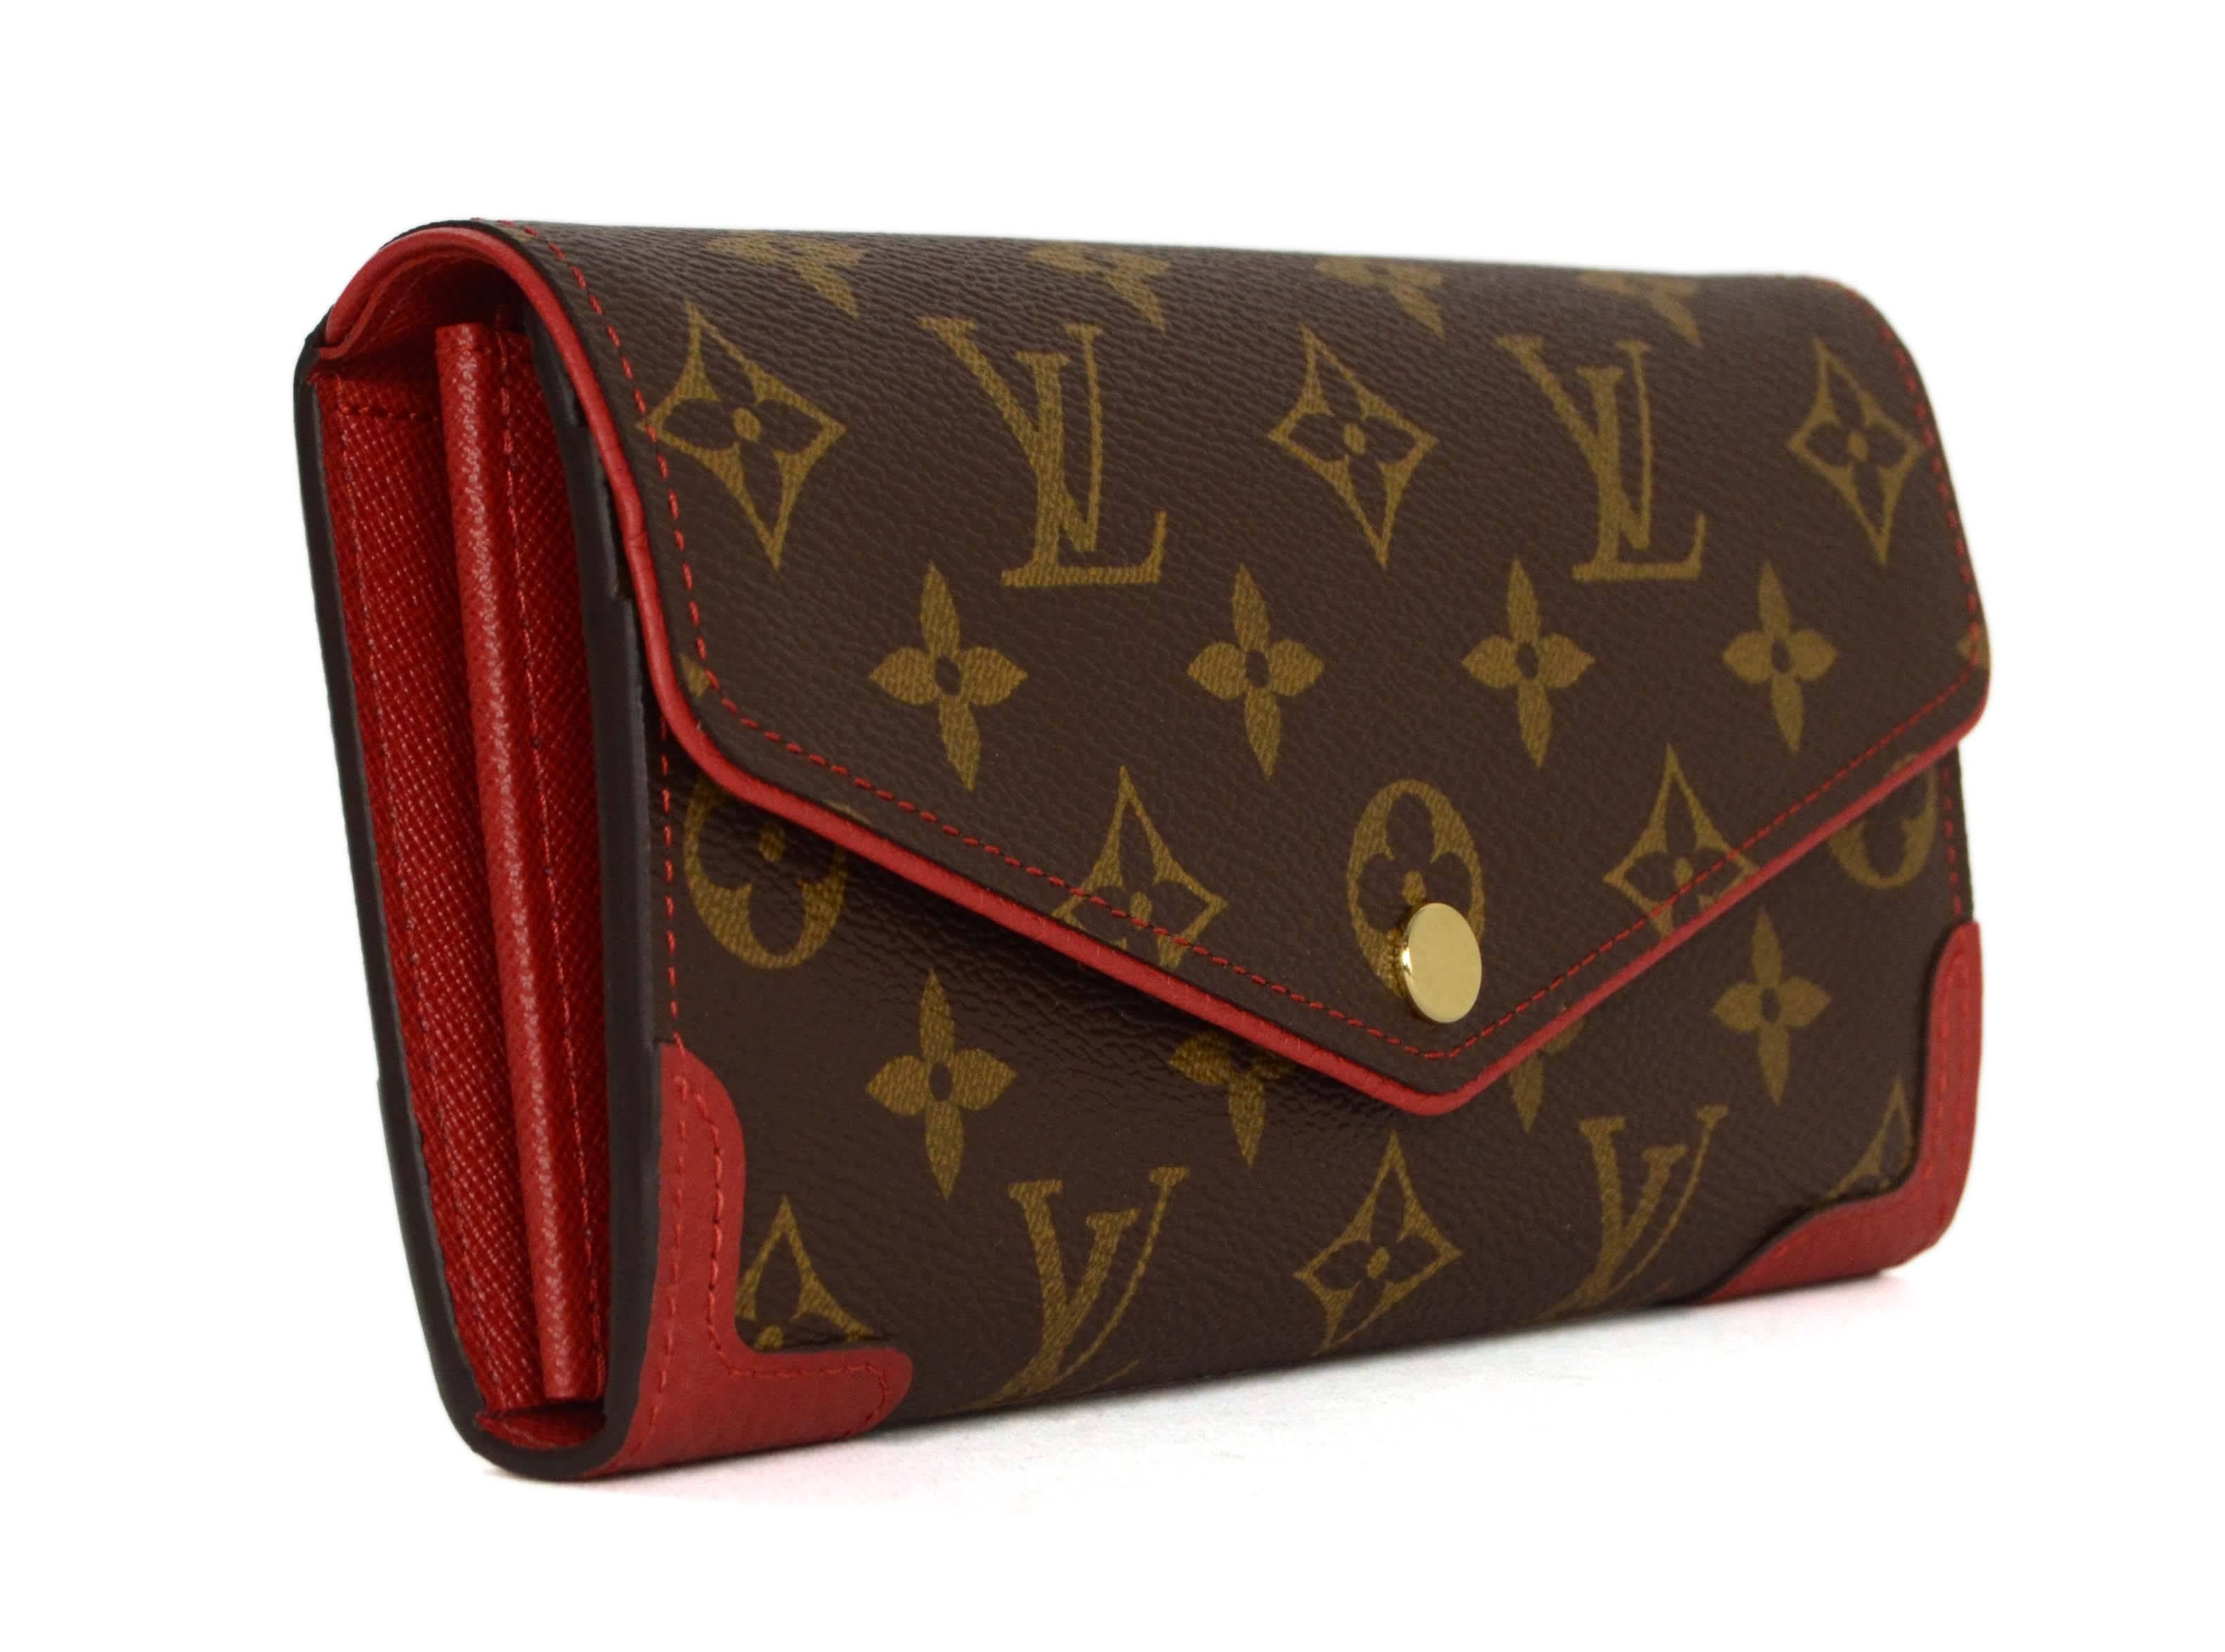 Louis Vuitton Monogram Sara Retiro Wallet
Features red leather trim

    Made In: France

    Year of Production: 2015

    Color: Monogram, red

    Hardware: Gold

    Materials: Coated canvas, leather

    Lining: Red leather